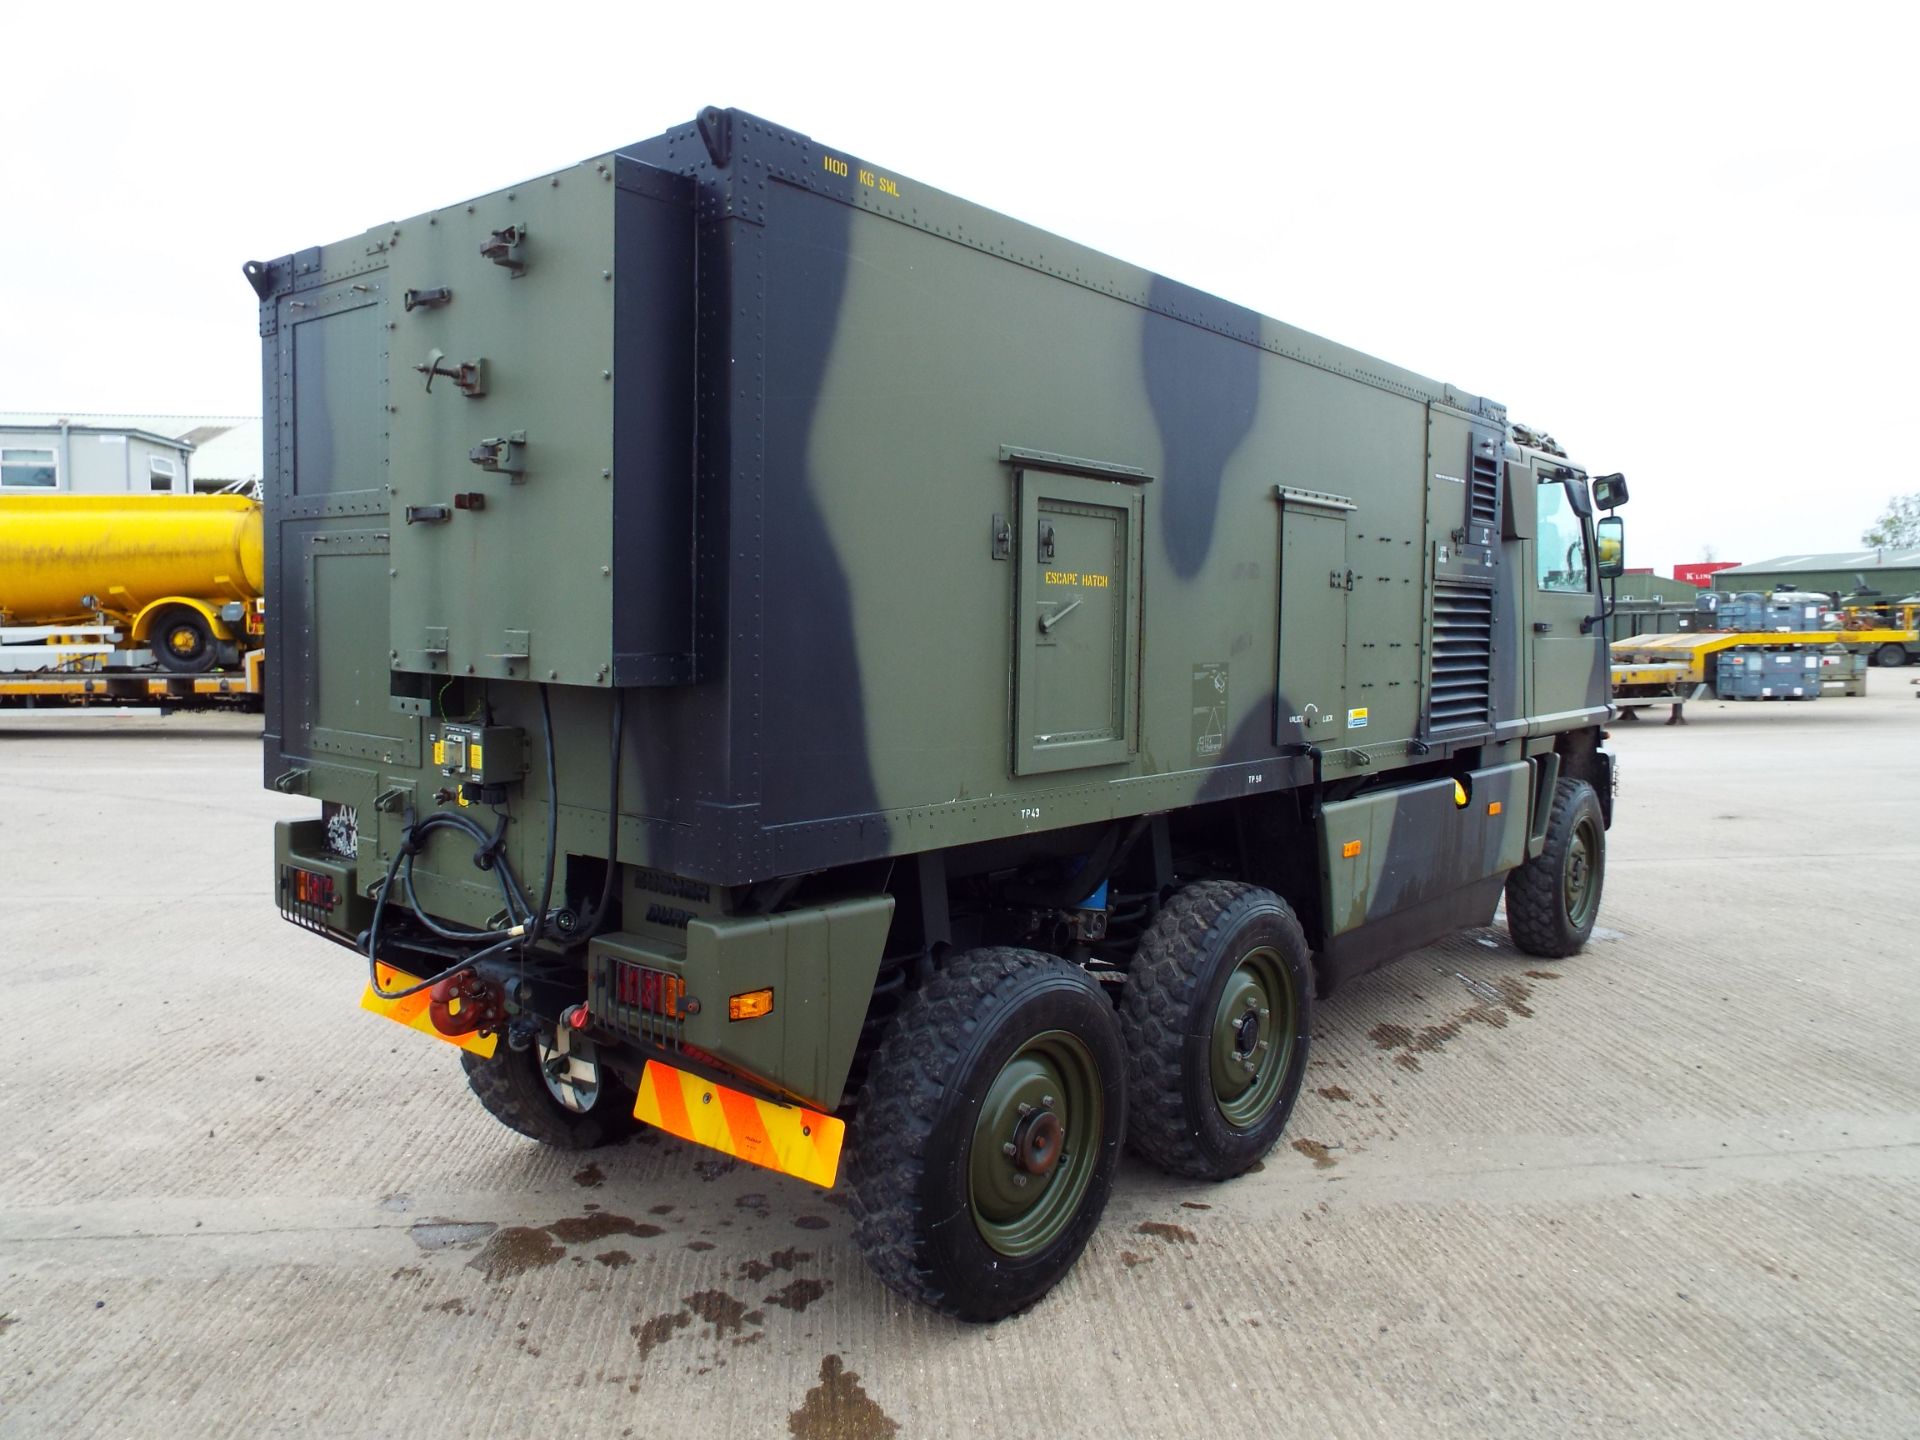 Ex Reserve Left Hand Drive Mowag Bucher Duro II 6x6 High-Mobility Tactical Vehicle - Image 7 of 28